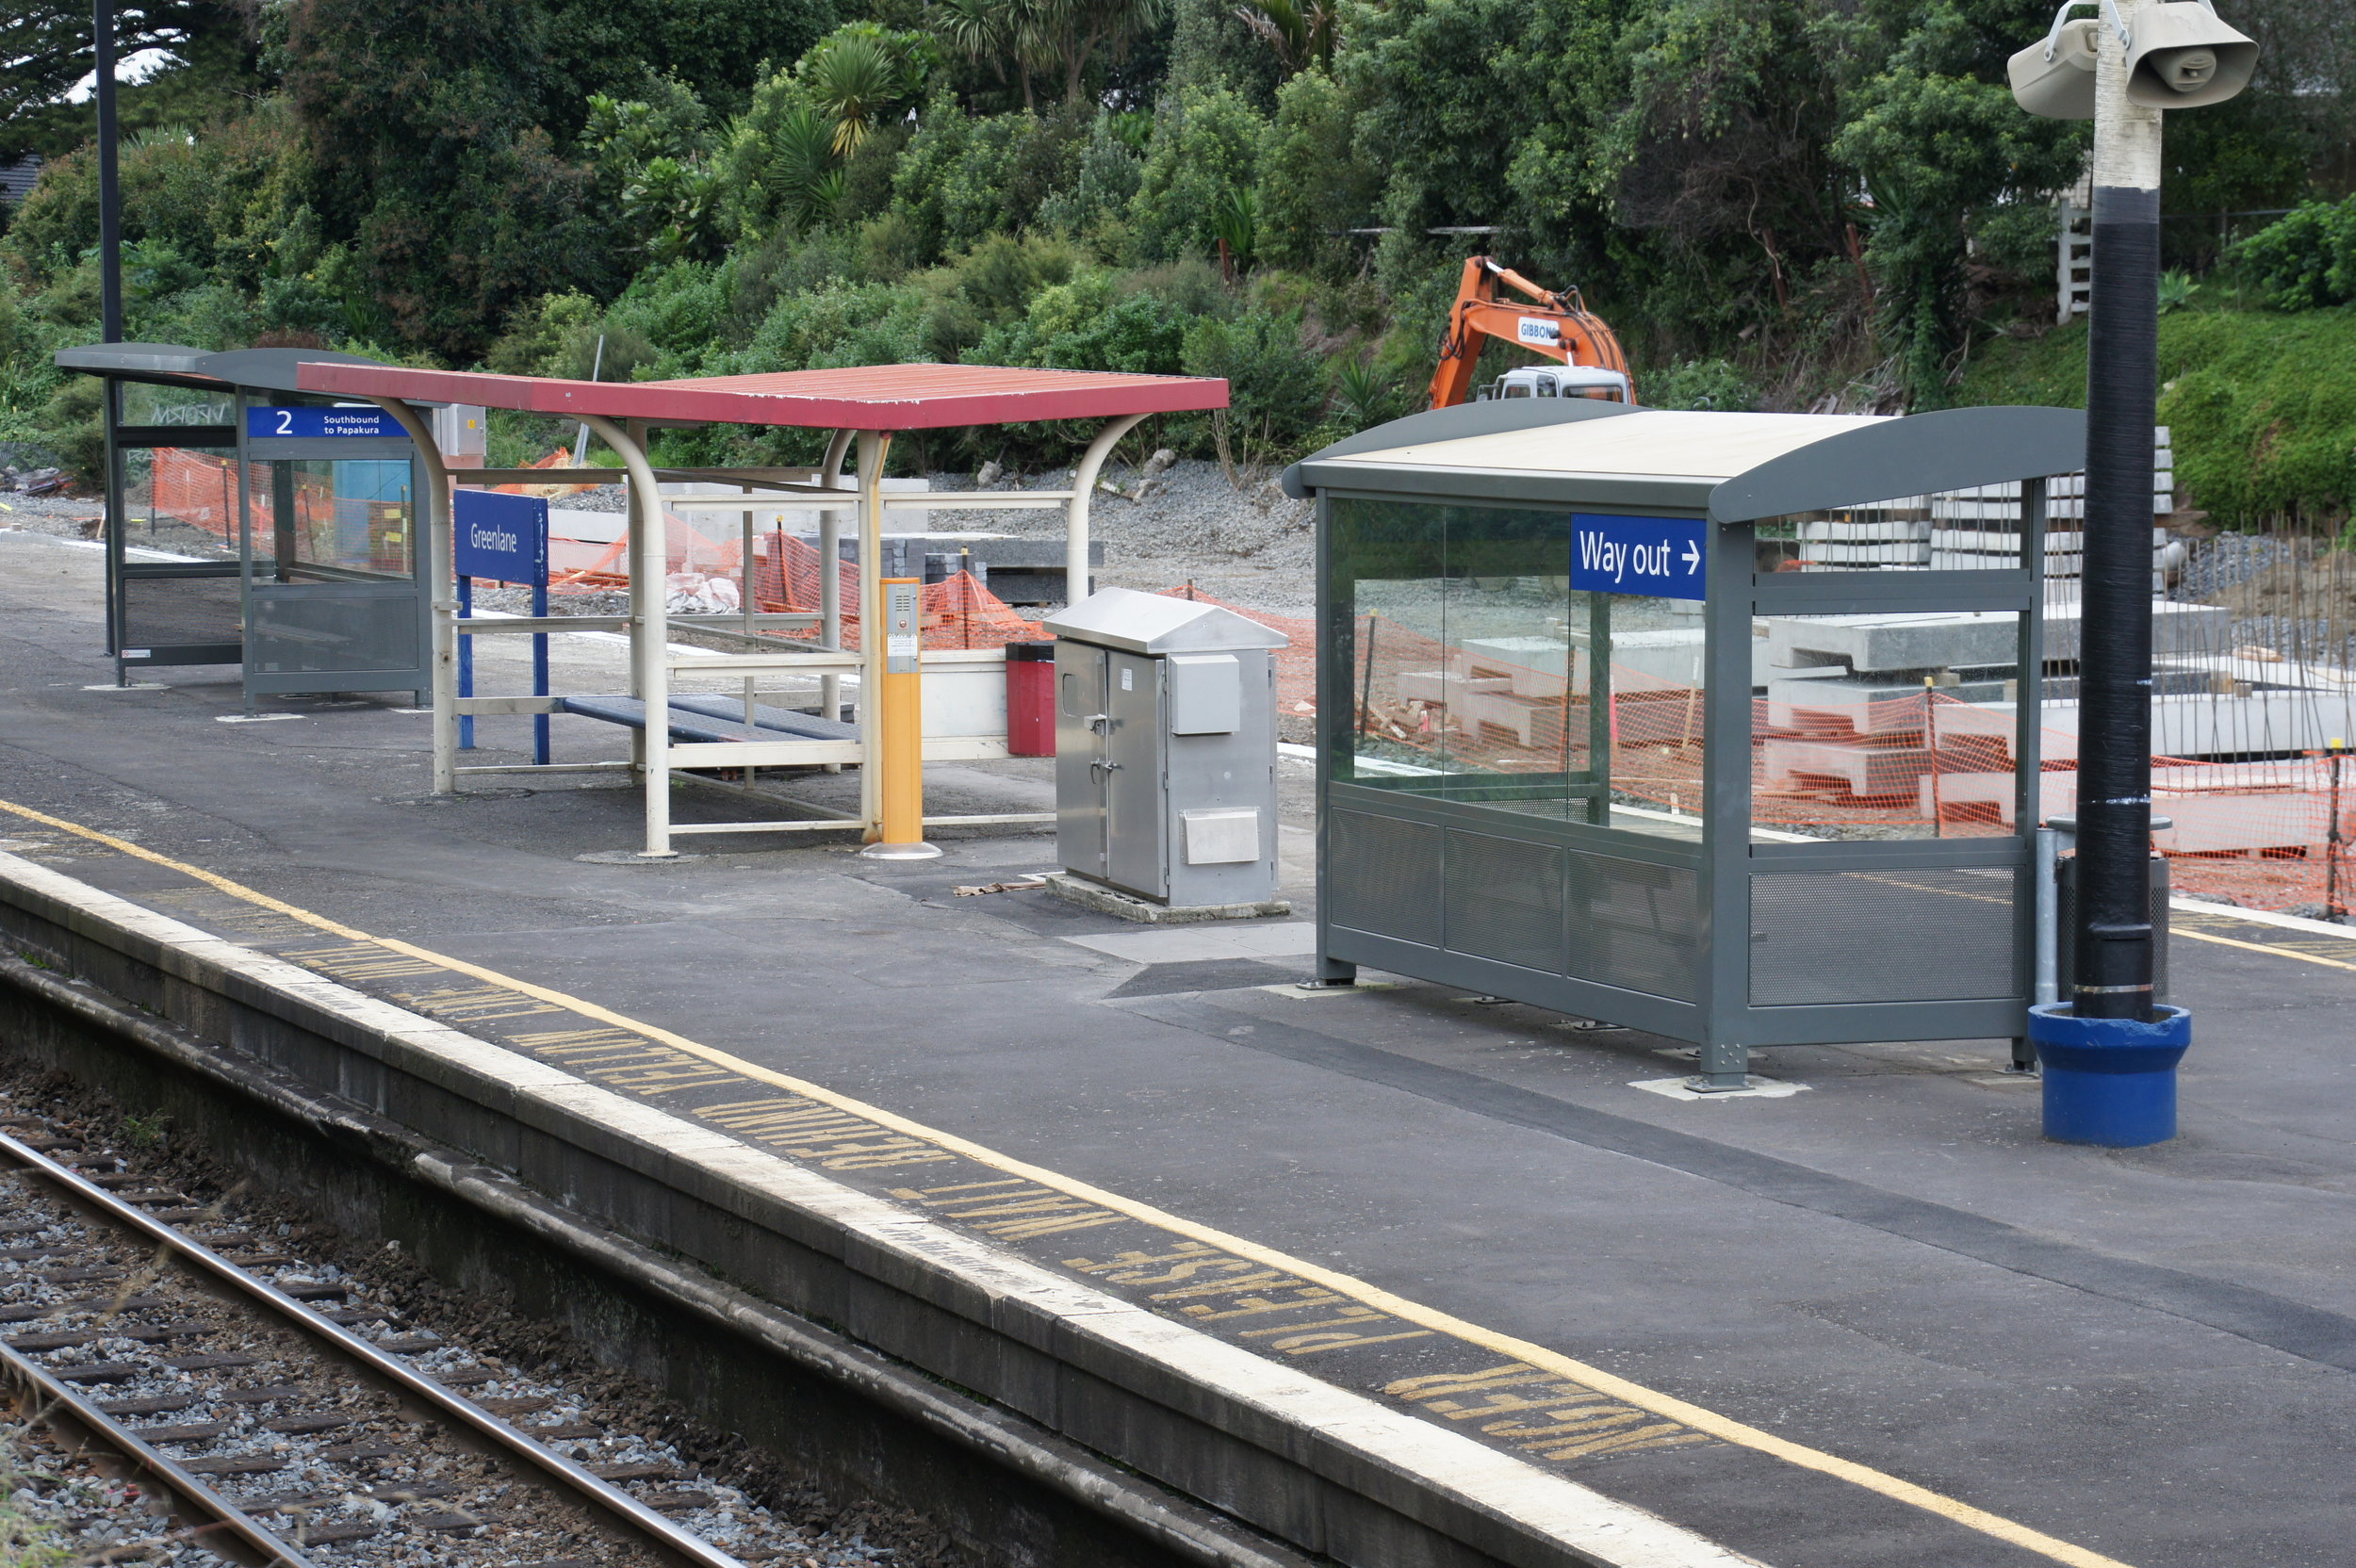   DESOLATE: As the electrification work began, stations like Greenlane looked unappealing and needed an upgrade  